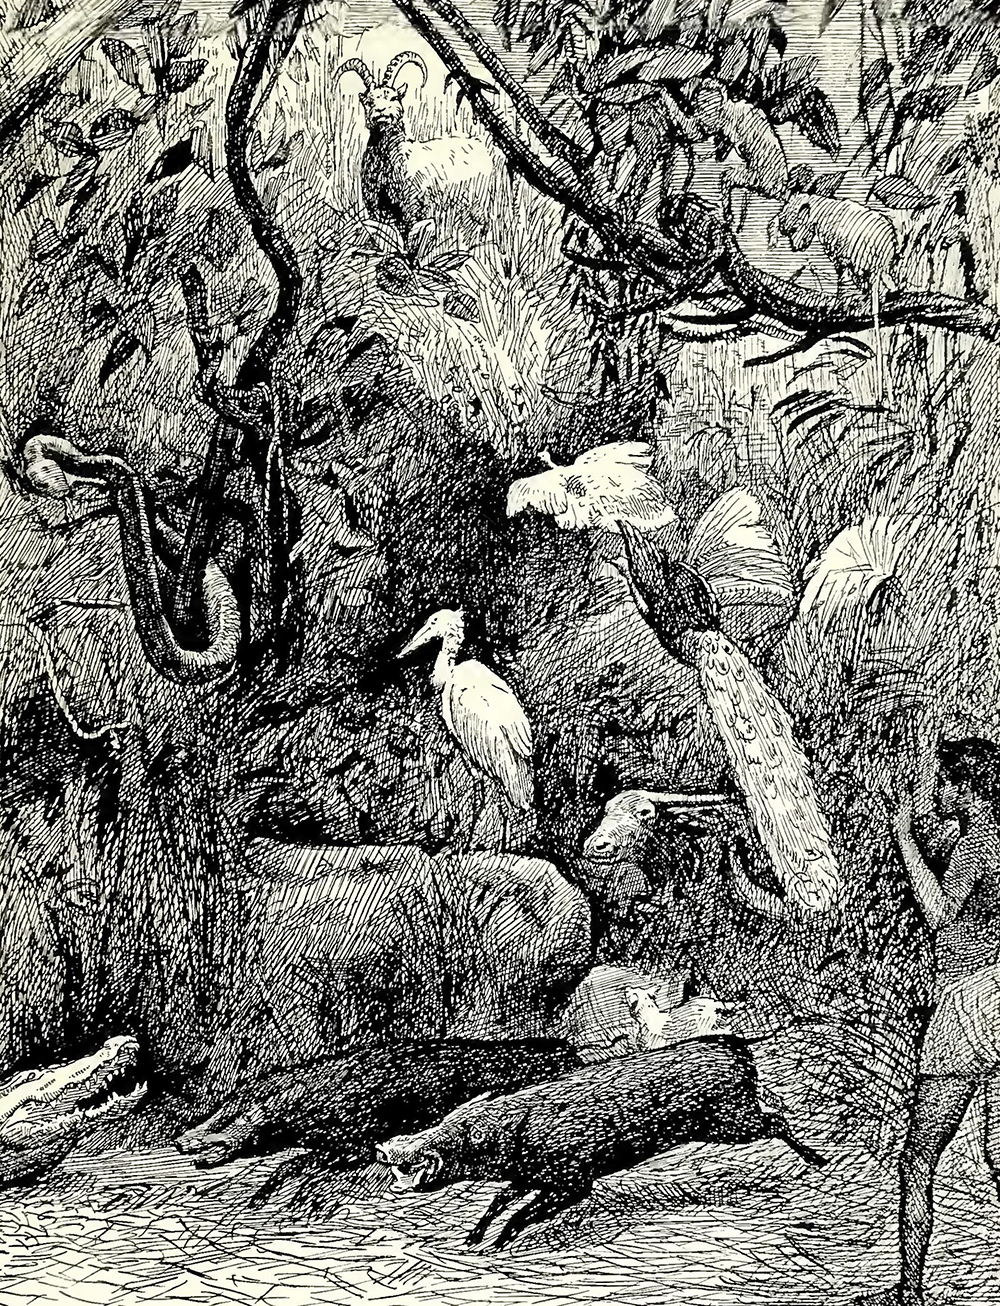 ‘Indian Jungle Life’ – a sketch of Rowland Ward’s ‘Jungle’ display in Cundall’s Reminiscences of the Colonial and Indian Exhibition, 1886.